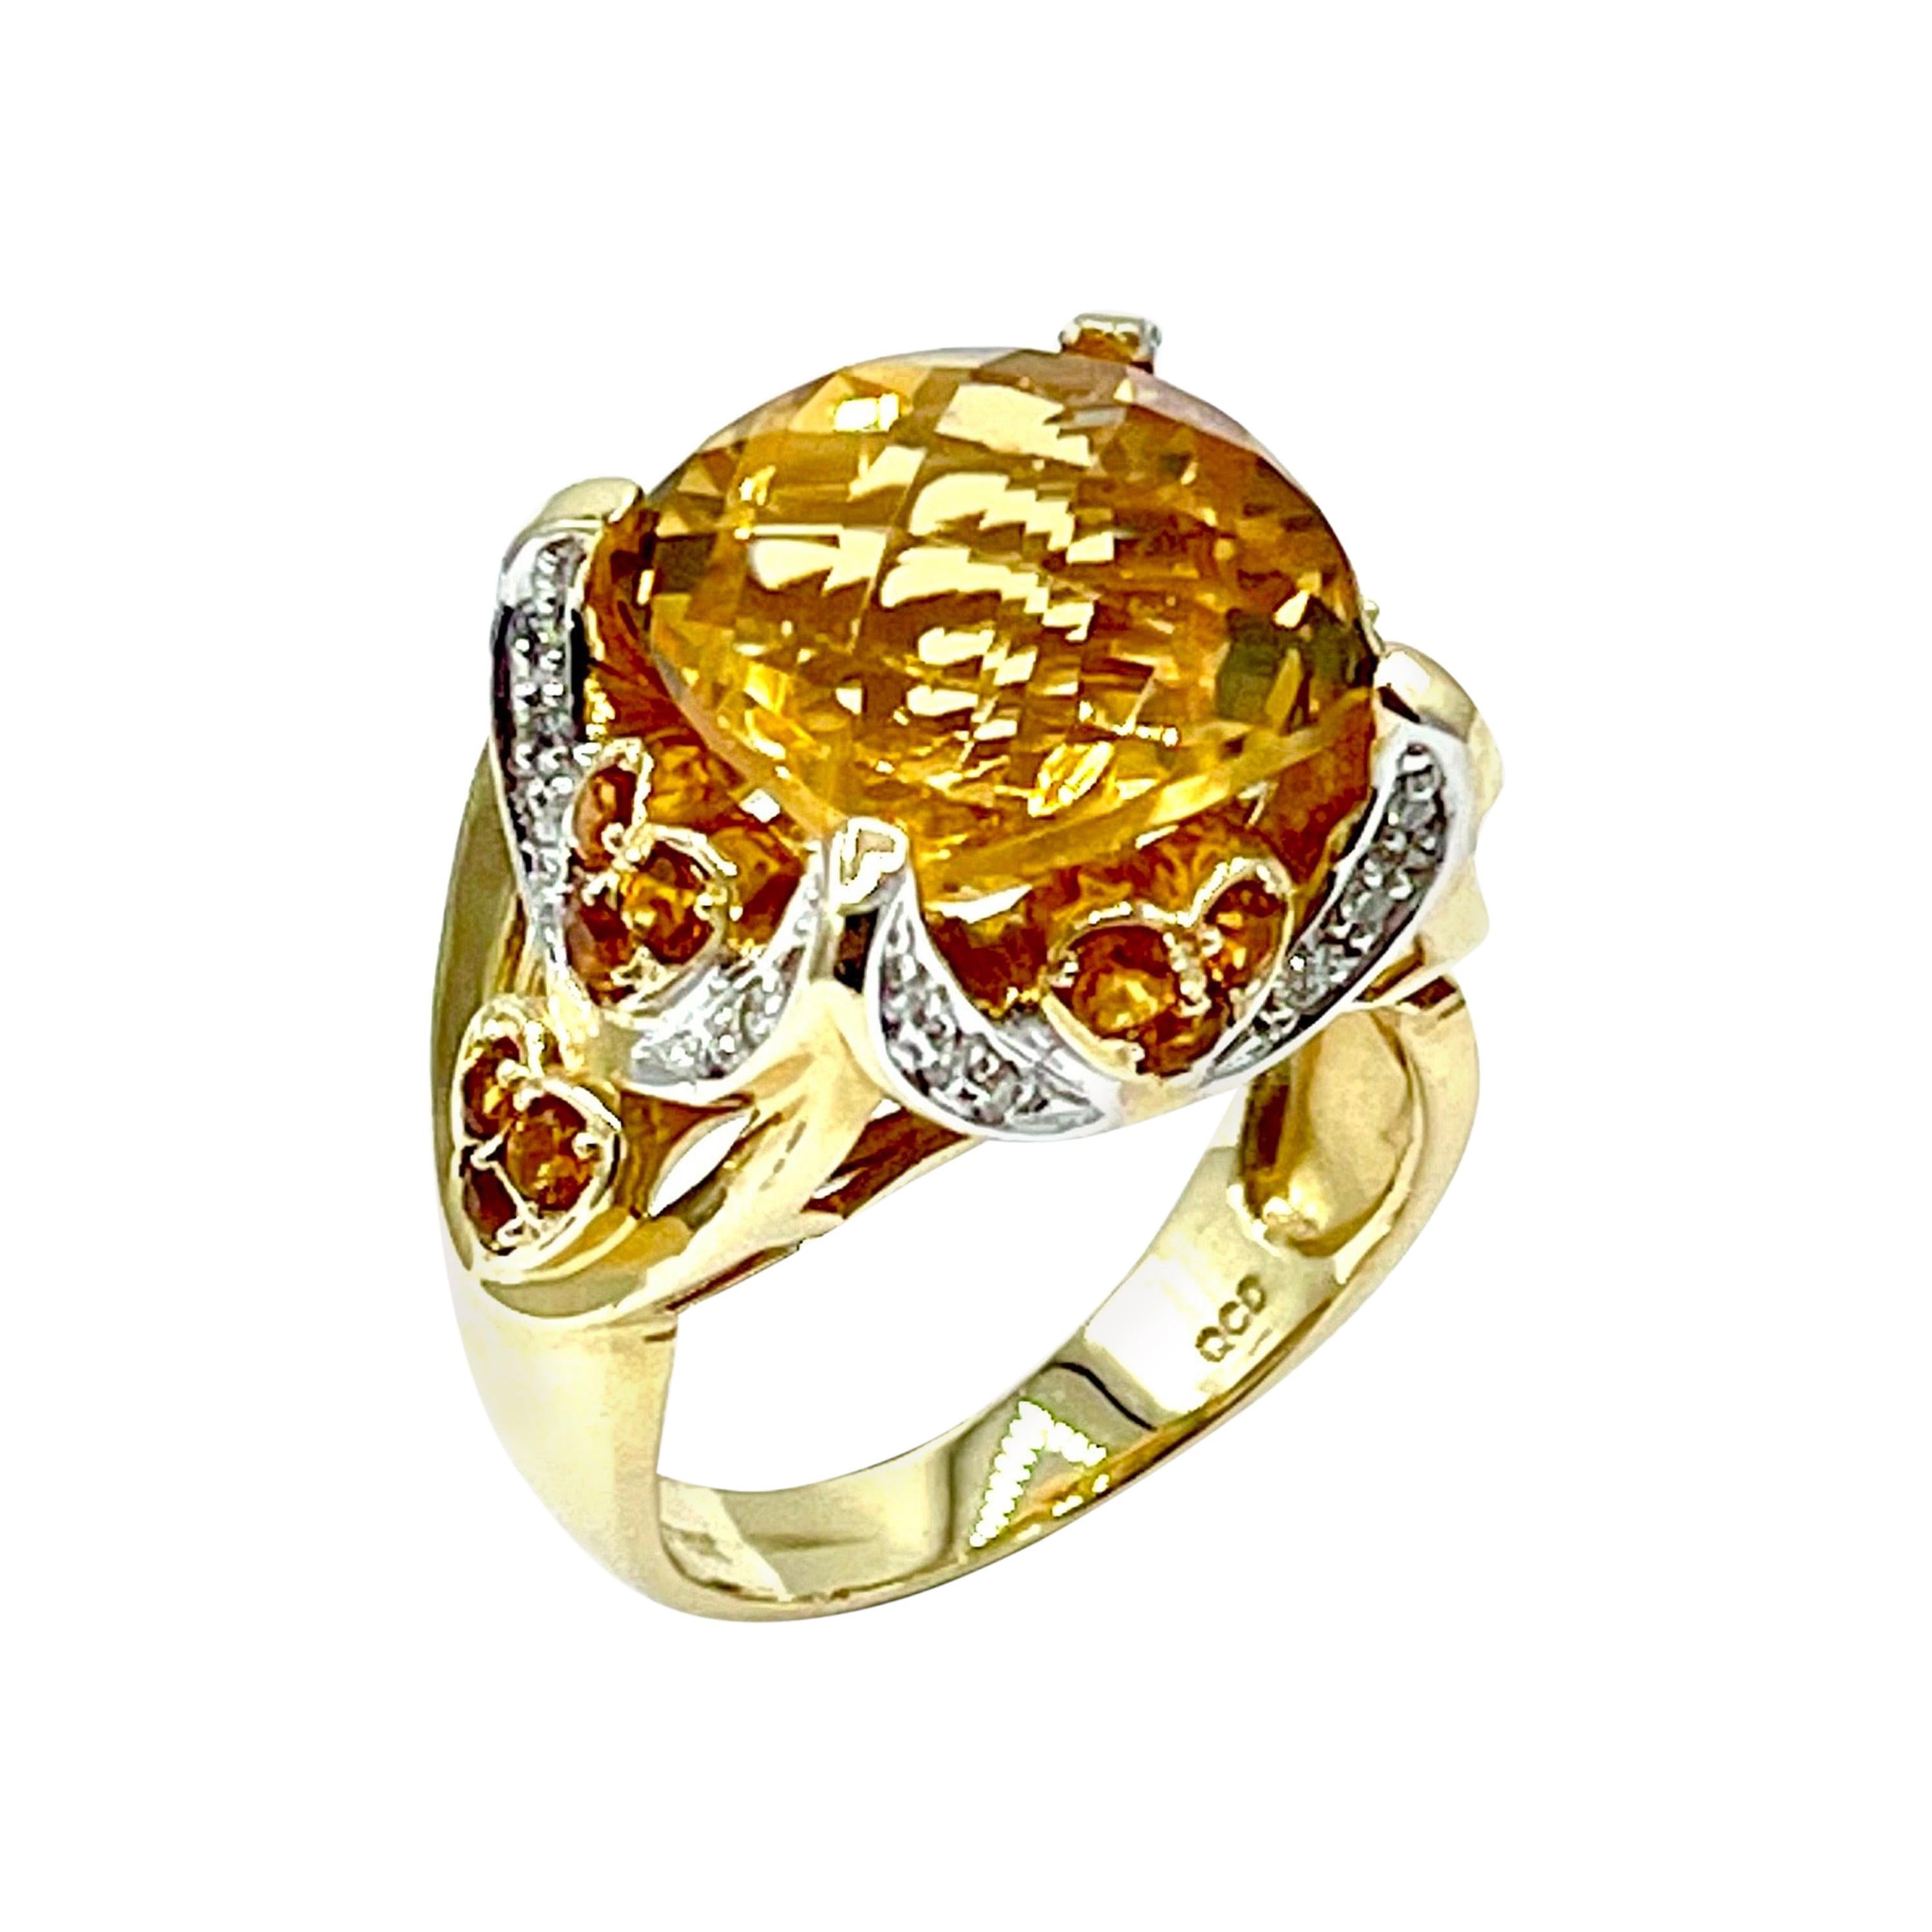 8.07 Carat Faceted Cushion Citrine and Diamond Yellow Gold Fashion Ring